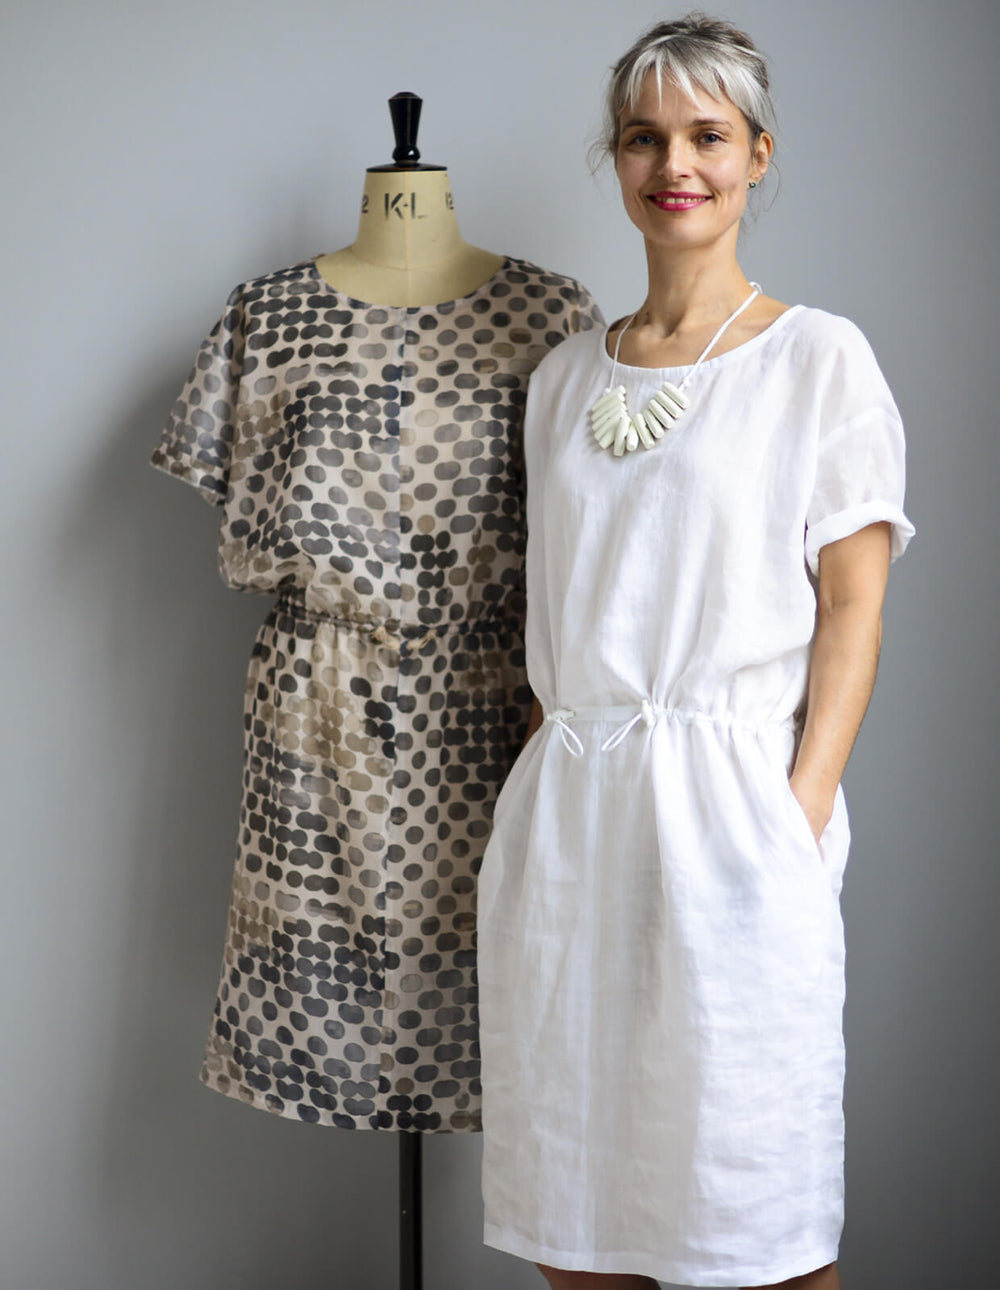 Woman wearing the Utility Dress sewing pattern from The Maker's Atelier on The Fold Line. A dress pattern made in cottons, linens, parachute silks and viscose fabrics, featuring a pull-on, drop-waist with drawstring, loose-fitting, round neckline and knee